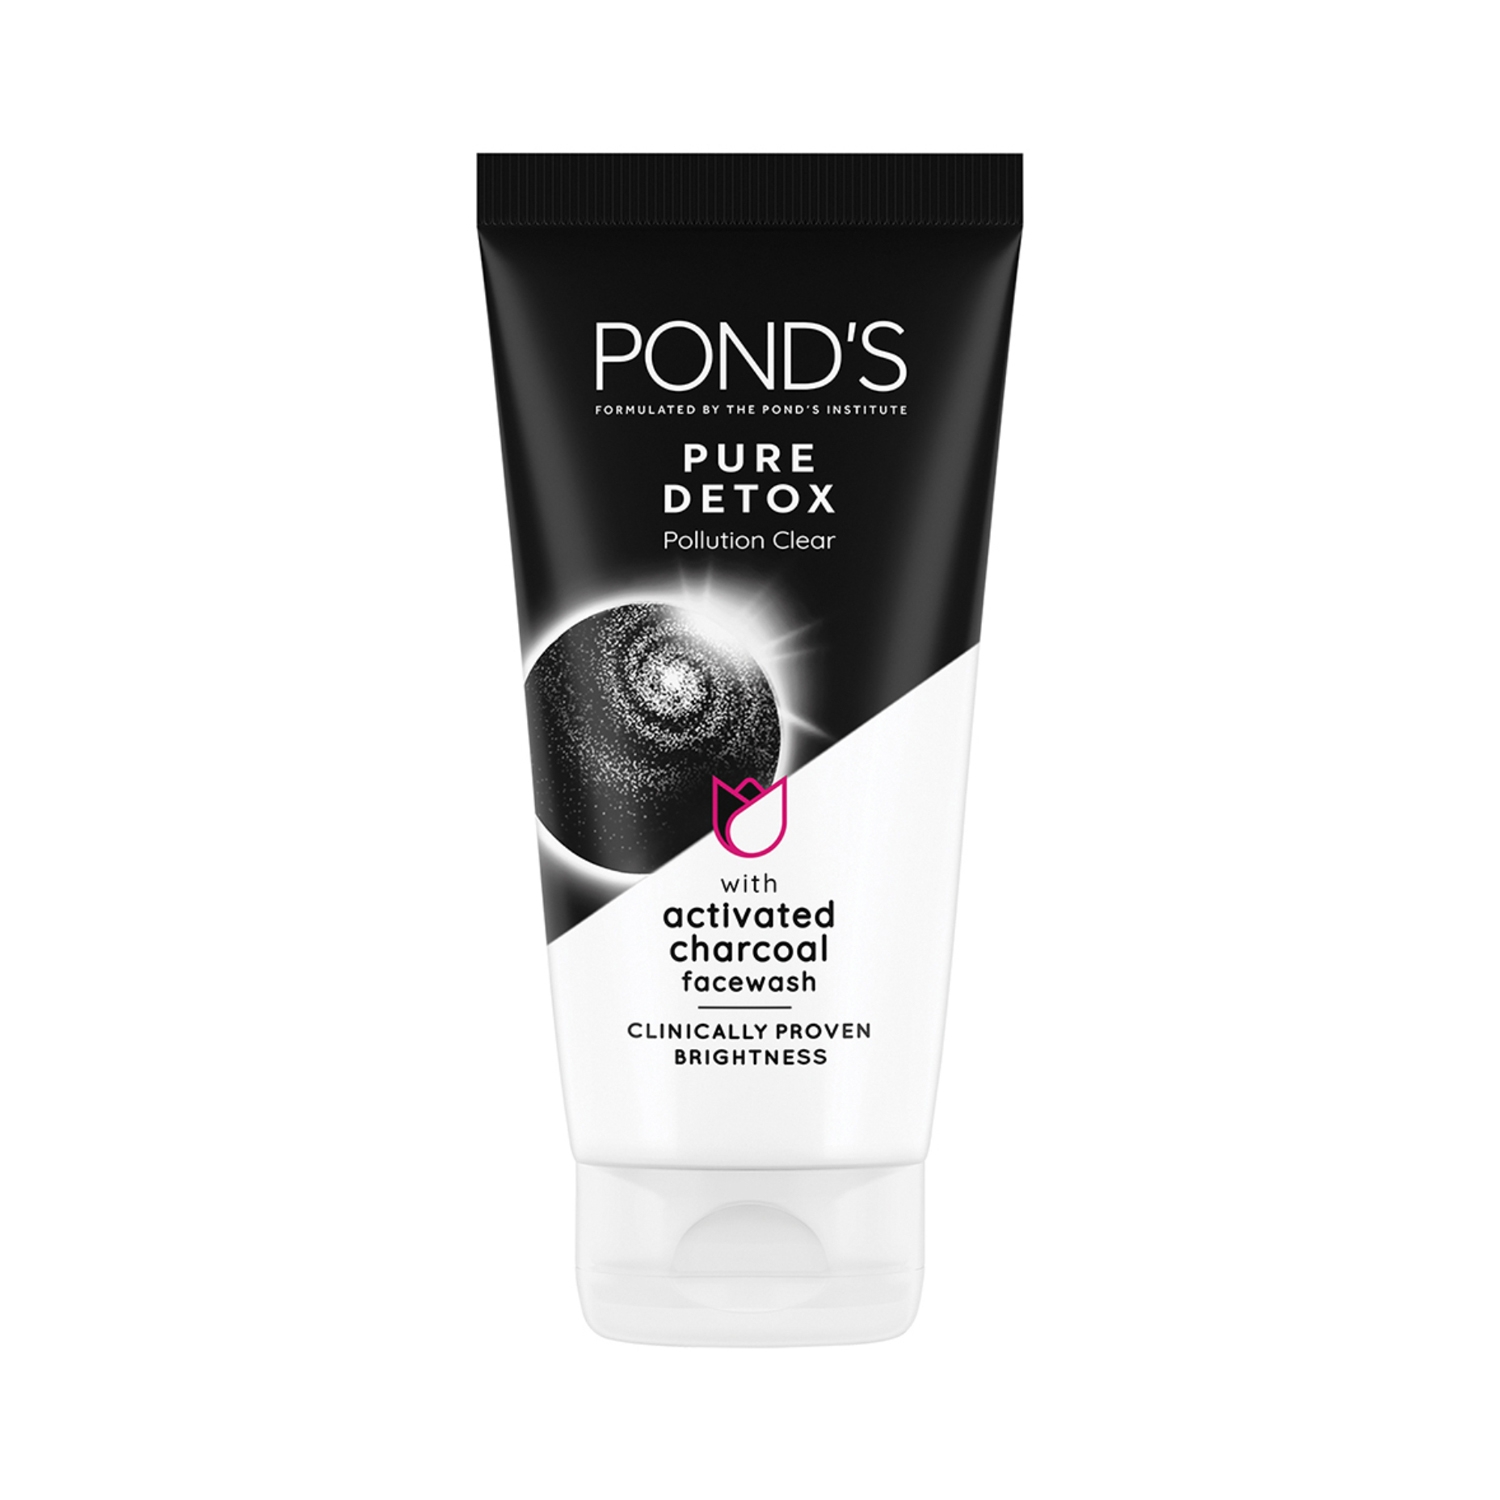 Pond's | Pond's Pure Detox Anti-Pollution Purity Face Wash With Activated Charcoal - (150g)